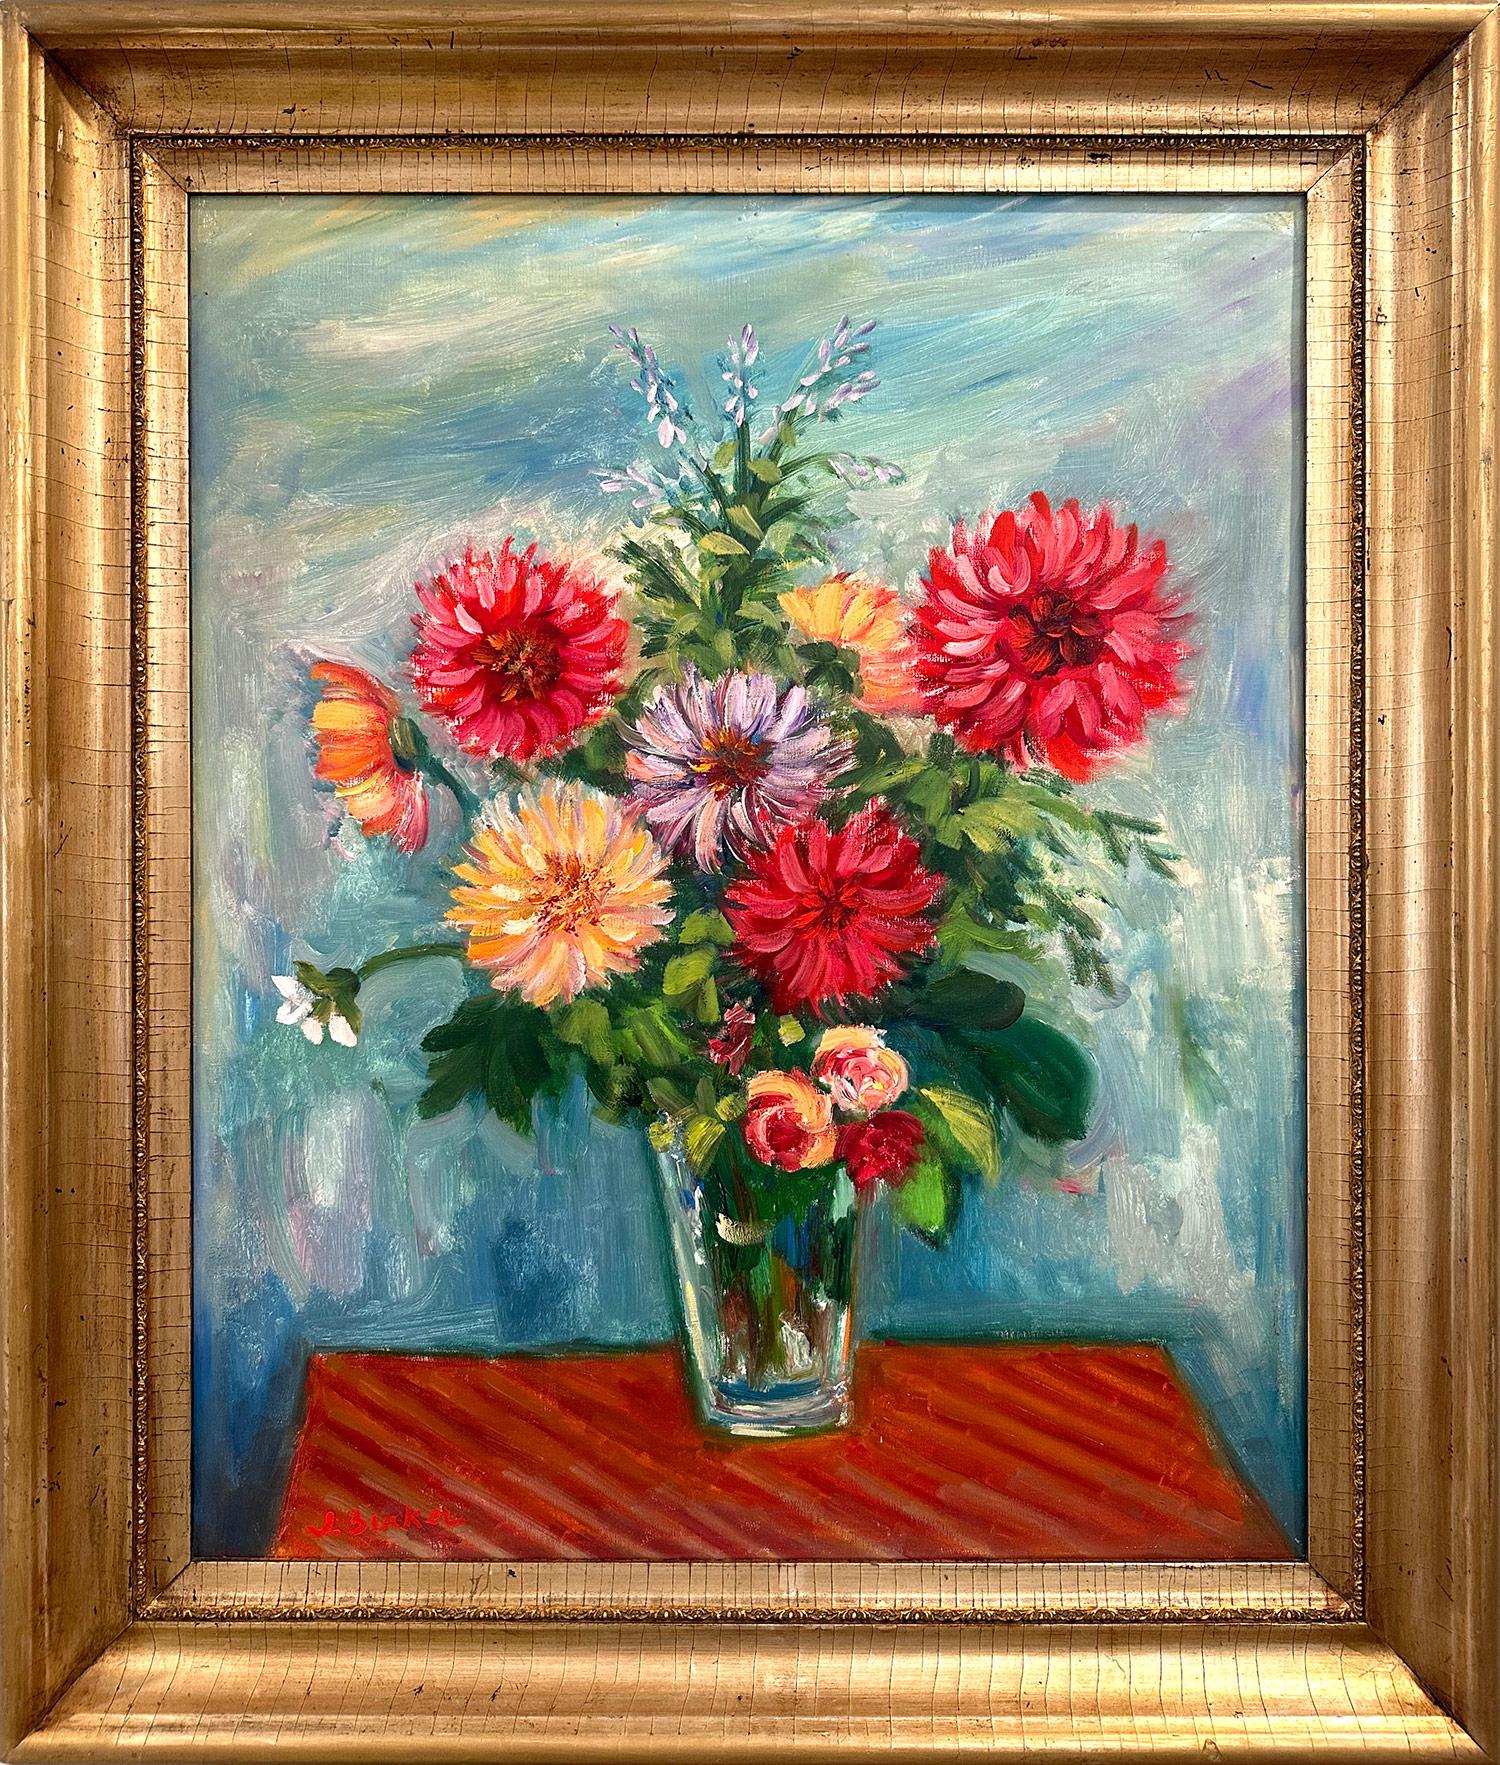 Jacques Zucker Still-Life Painting - "Floral Arrangement with Glass Vase" Post-Impressionism Still Life Oil Painting